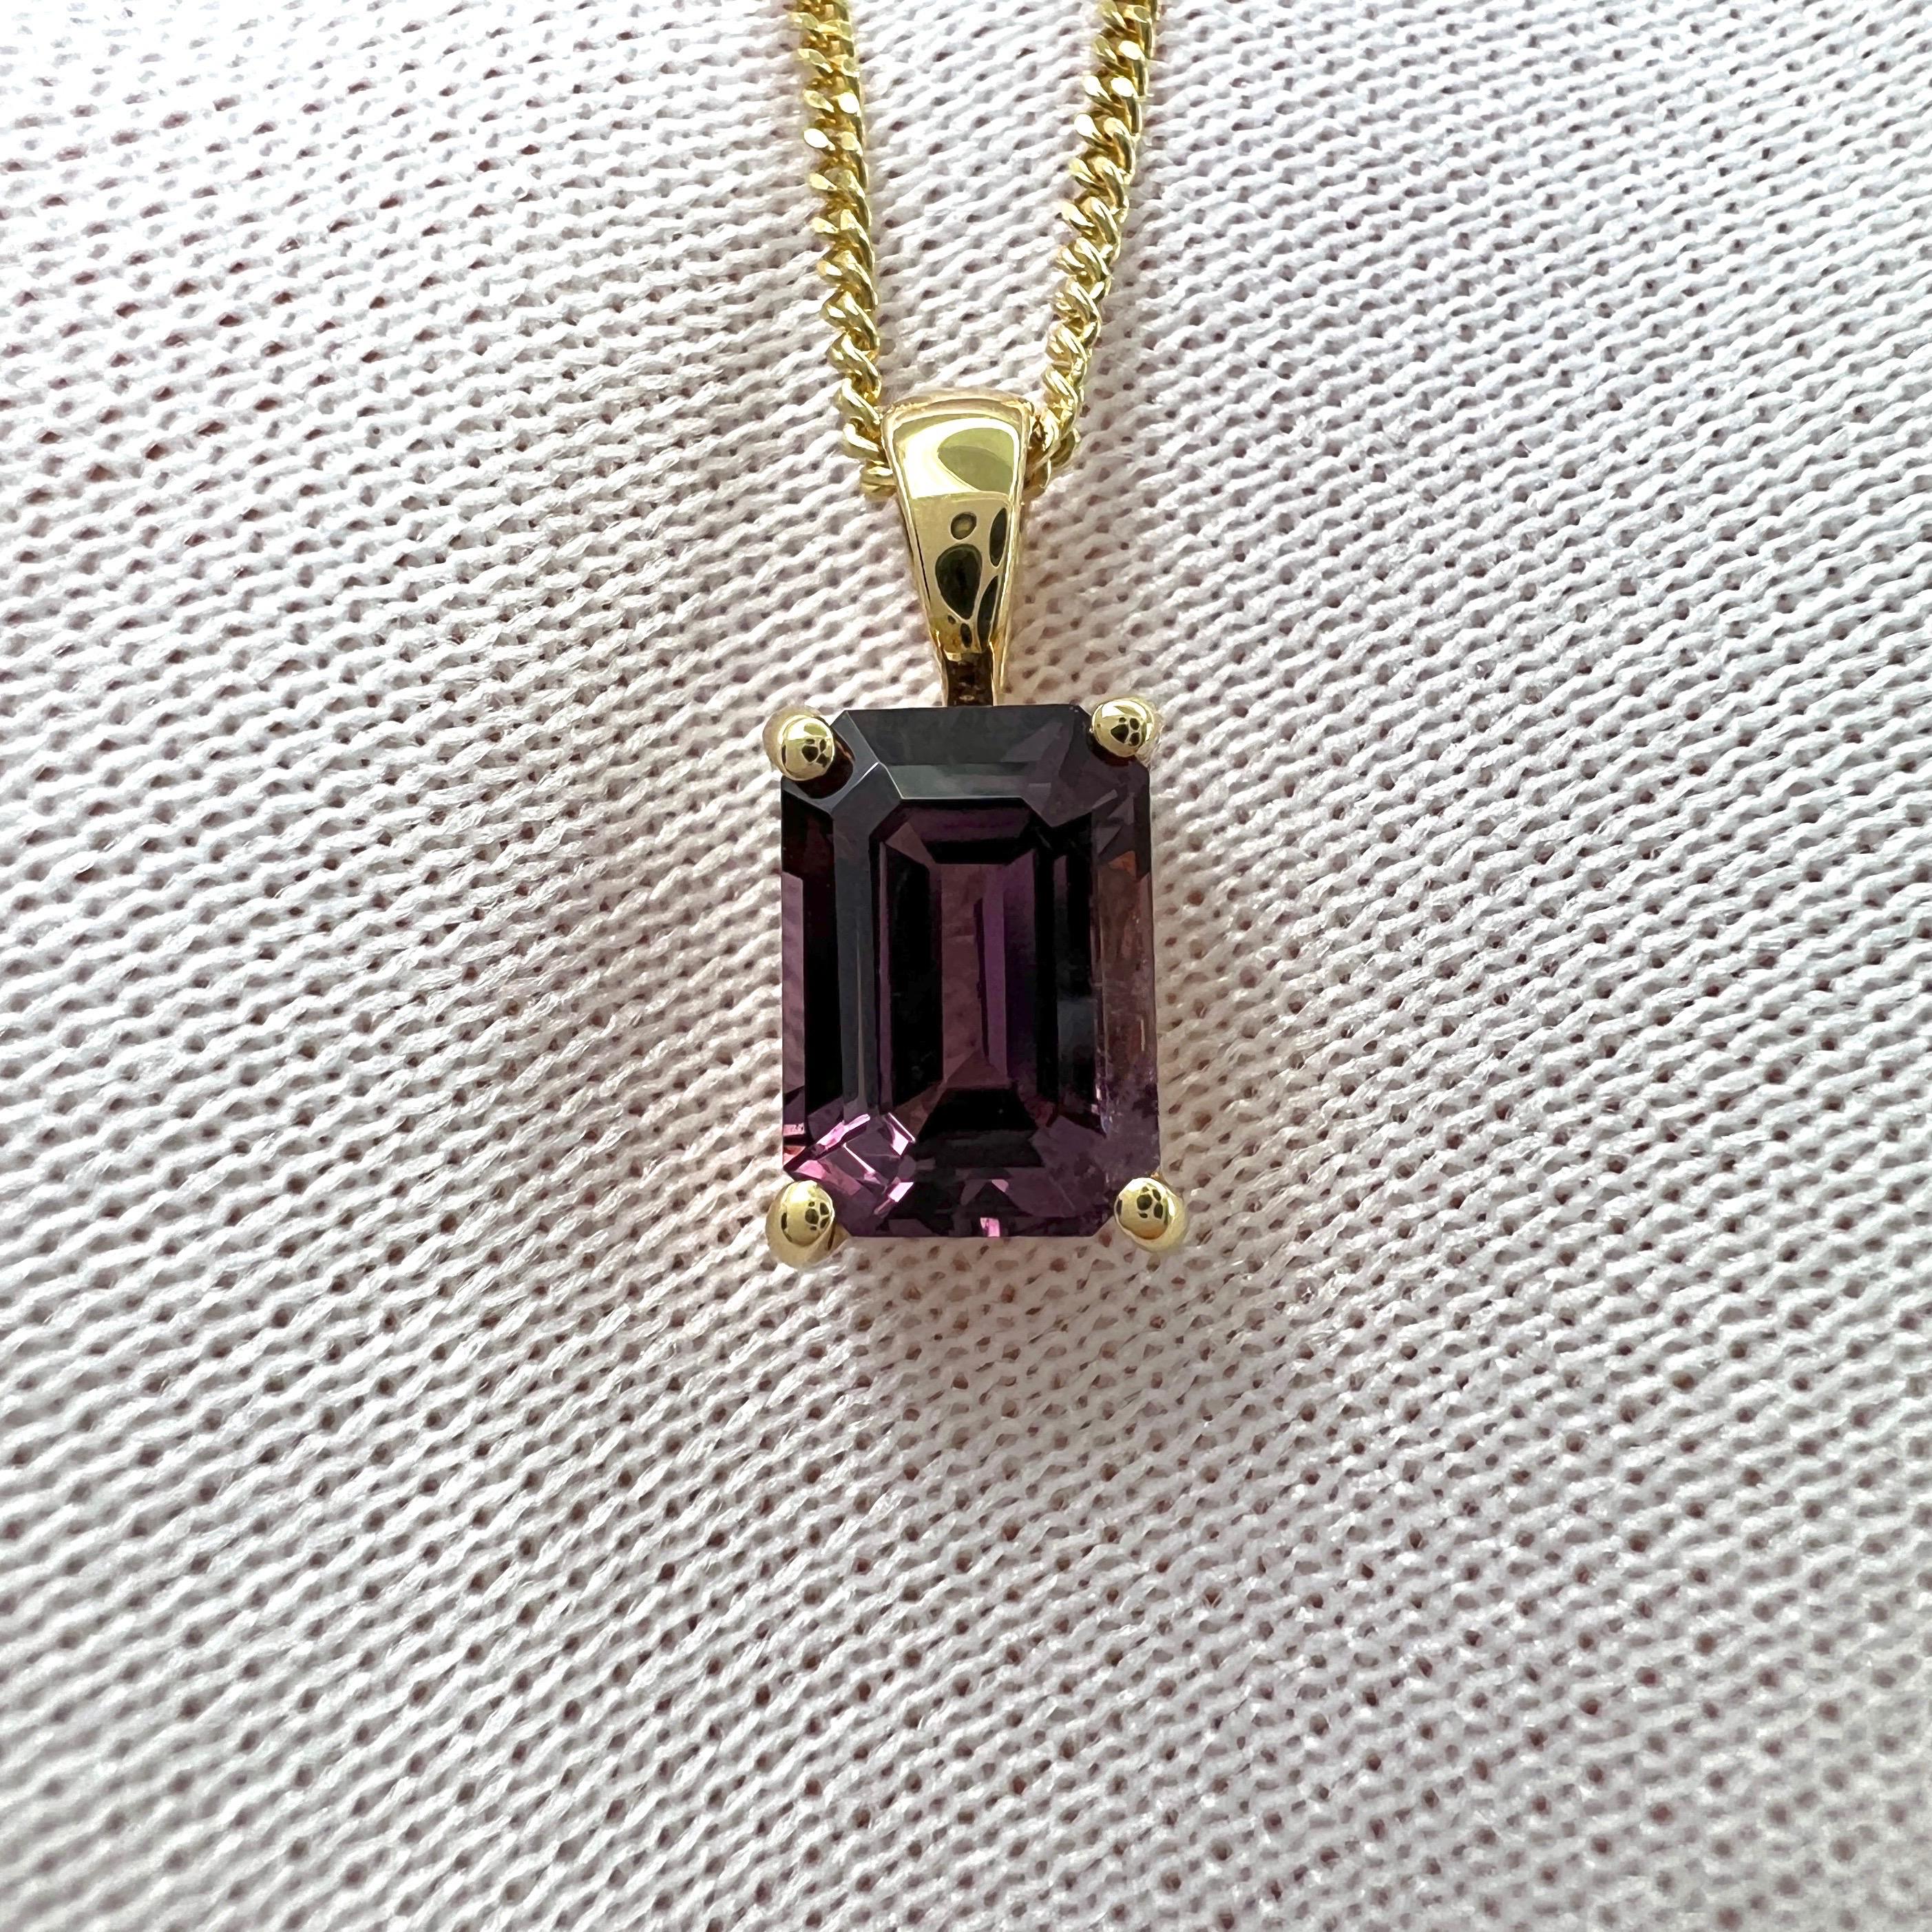 1.17 Carat Vivid Pink Purple Spinel Emerald Cut Yellow Gold Pendant Necklace For Sale 1